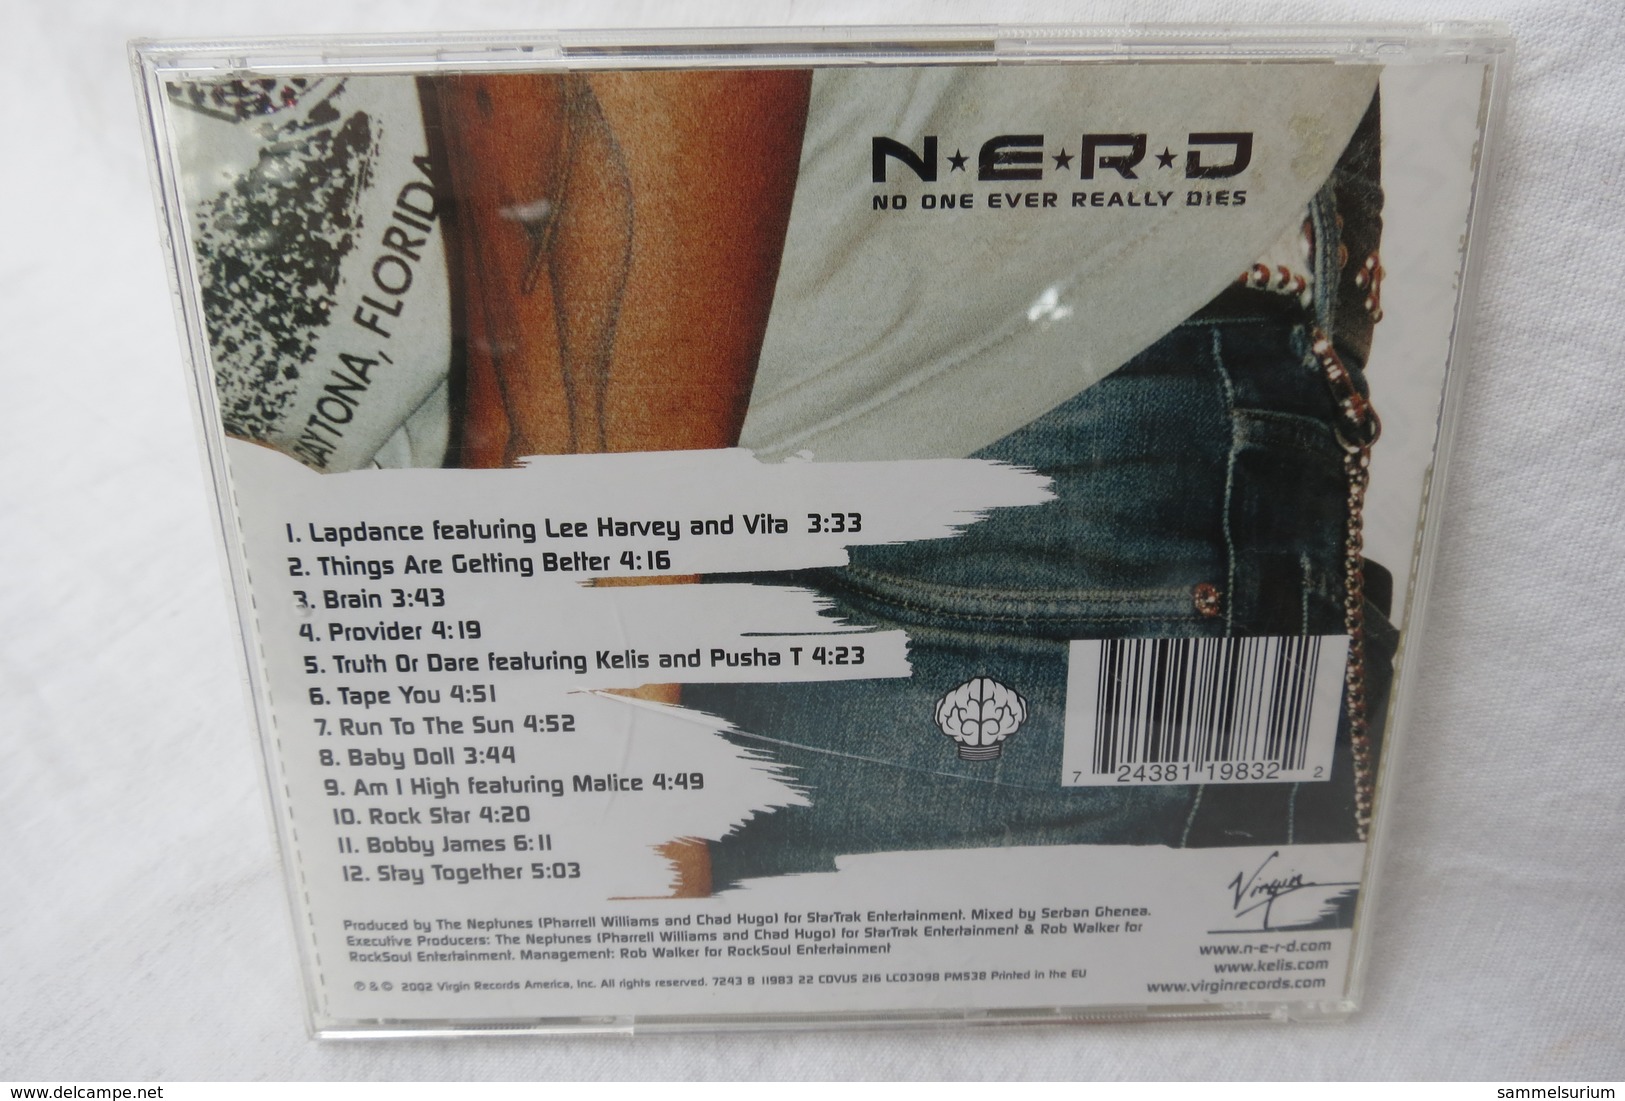 CD "Nerd" In Search Of, No One Ever Really Dies - Rap & Hip Hop